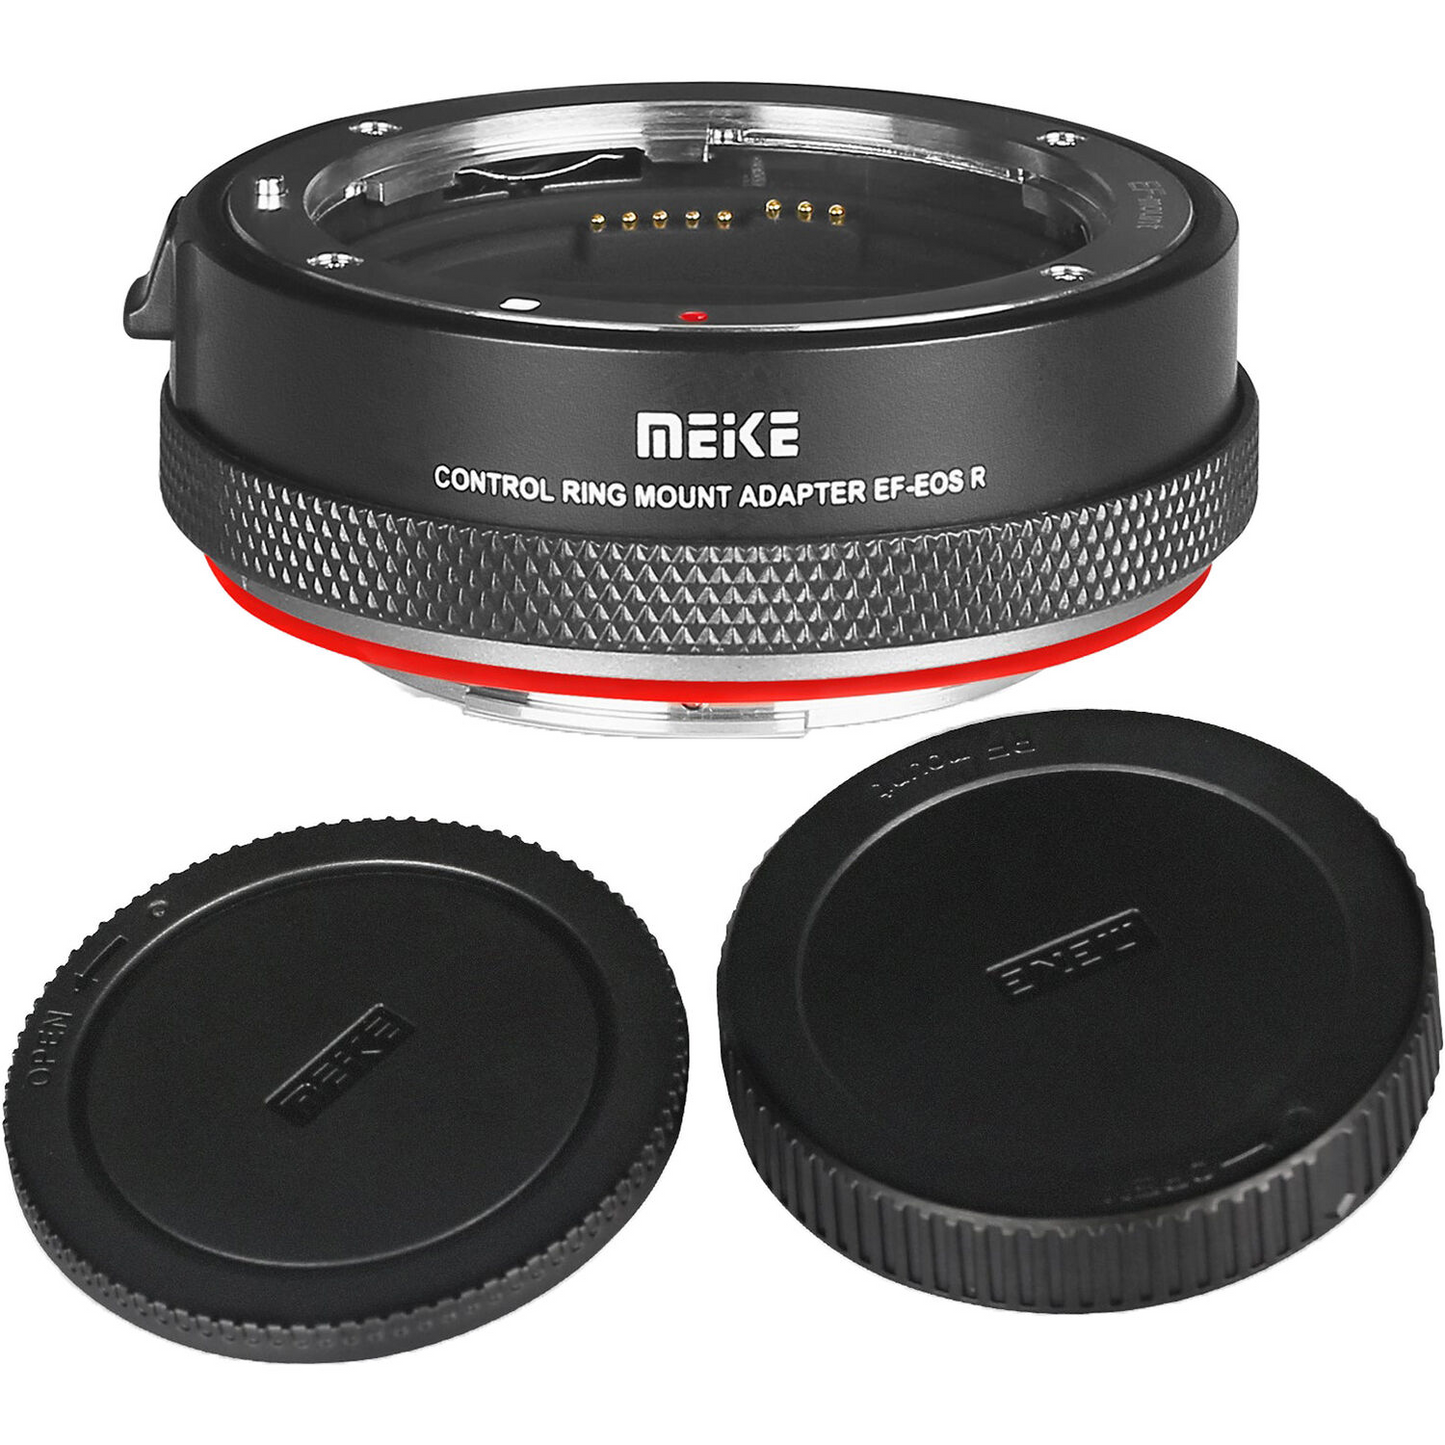 Meike MK-EFTE-B Auto Focus Mount Adapter for Canon EF/EF-S Lens to Sony E Mount Camera Sony A7SII / A7 / A6000 / A6500 / A7SIII / A9 / A3000 Support Manual / Auto Aperture, PDAF & CDAF Mode DSLR & Mirrorless Camera